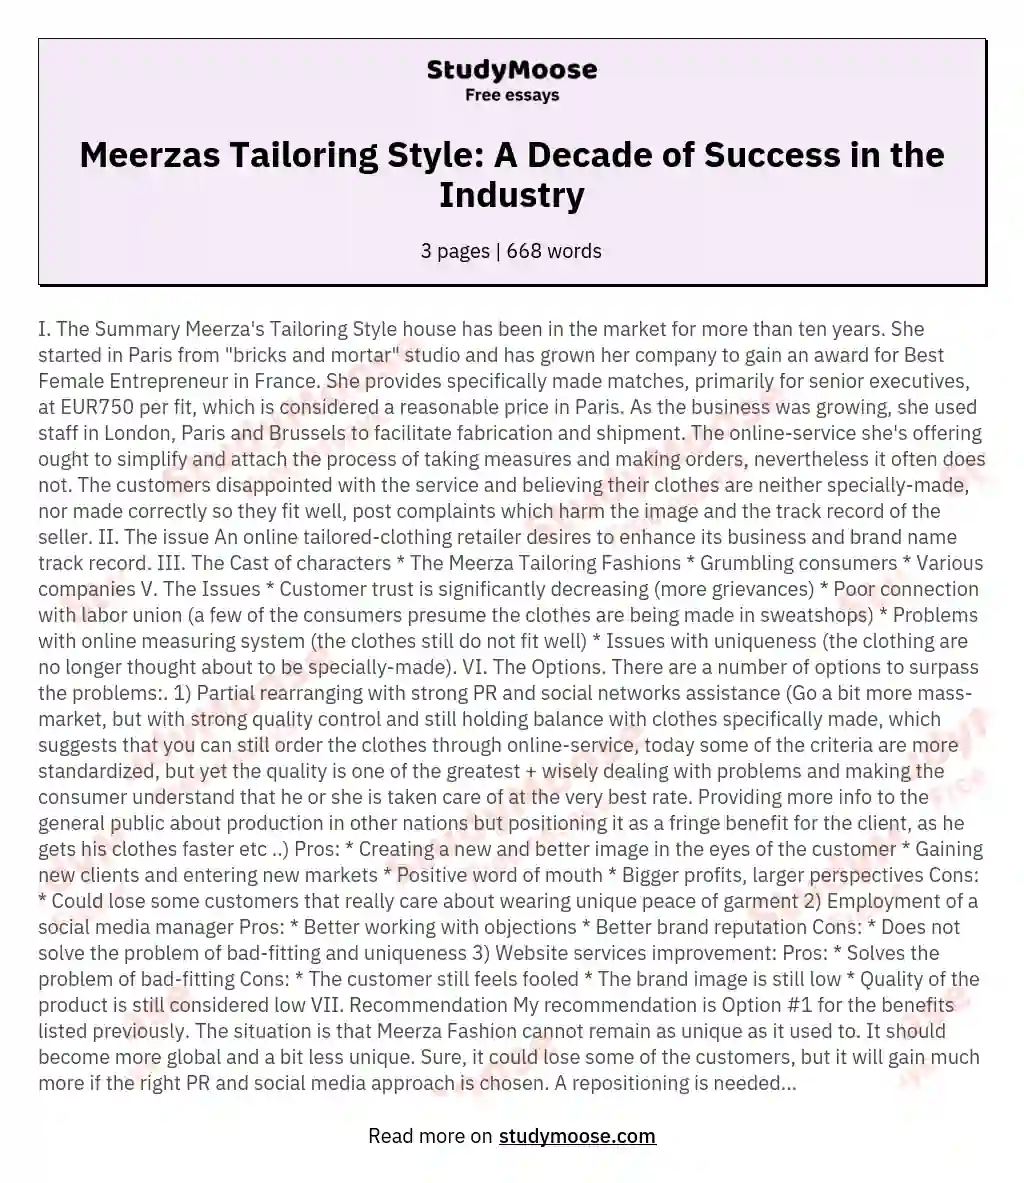 Meerzas Tailoring Style: A Decade of Success in the Industry essay